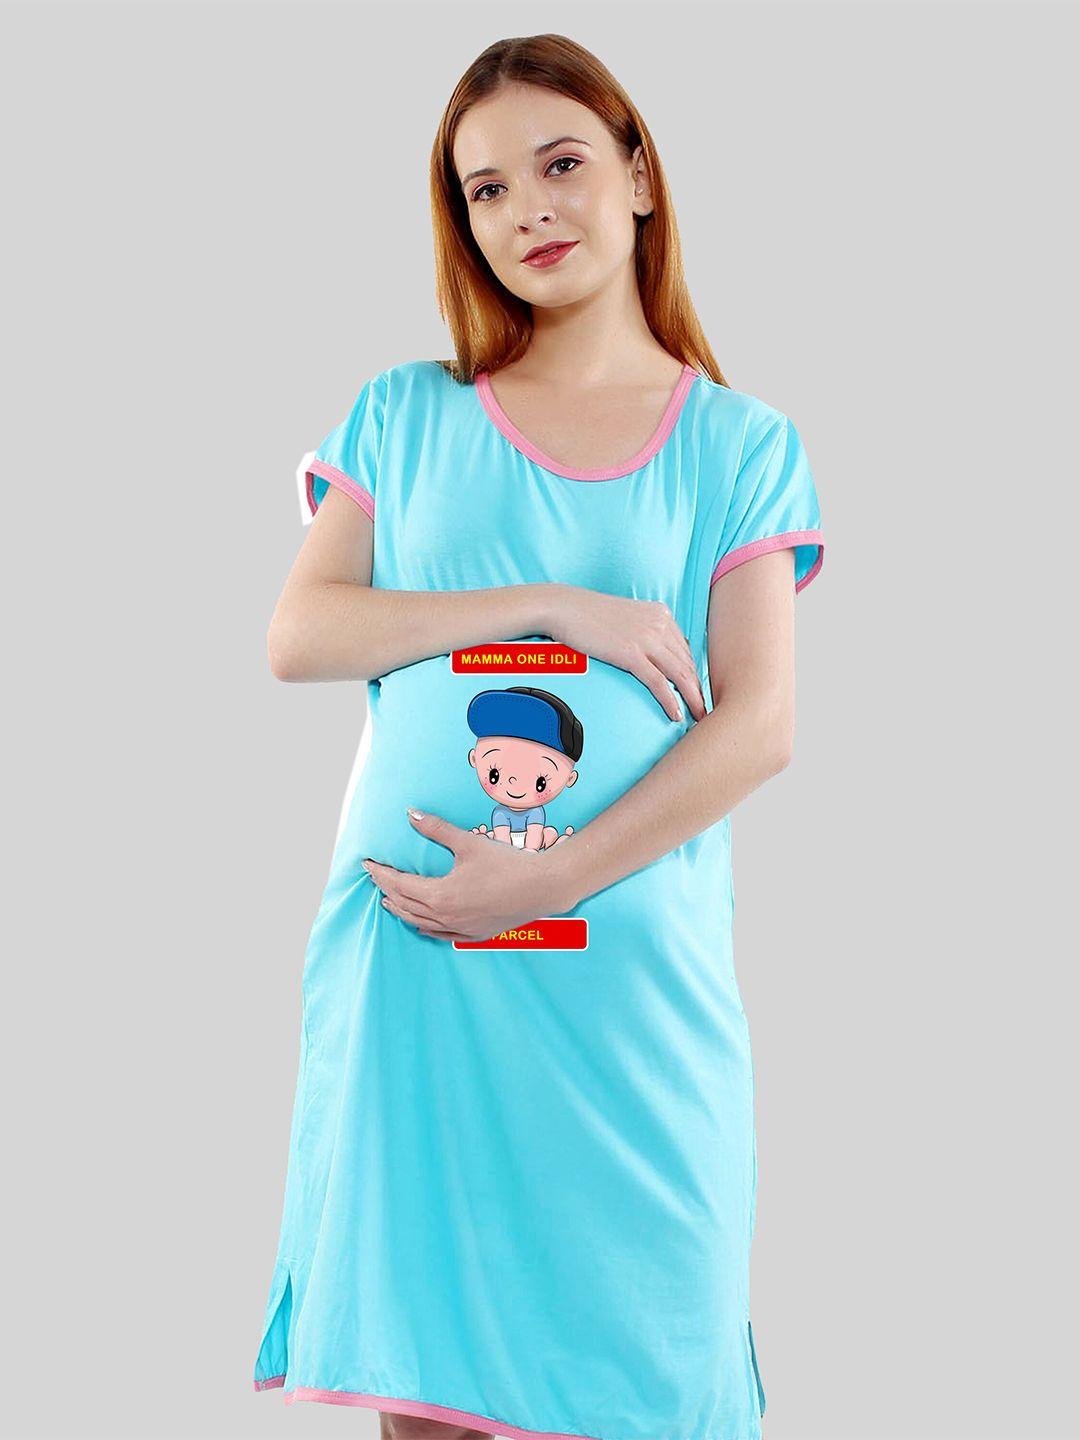 sillyboom printed cotton maternity t-shirt dress